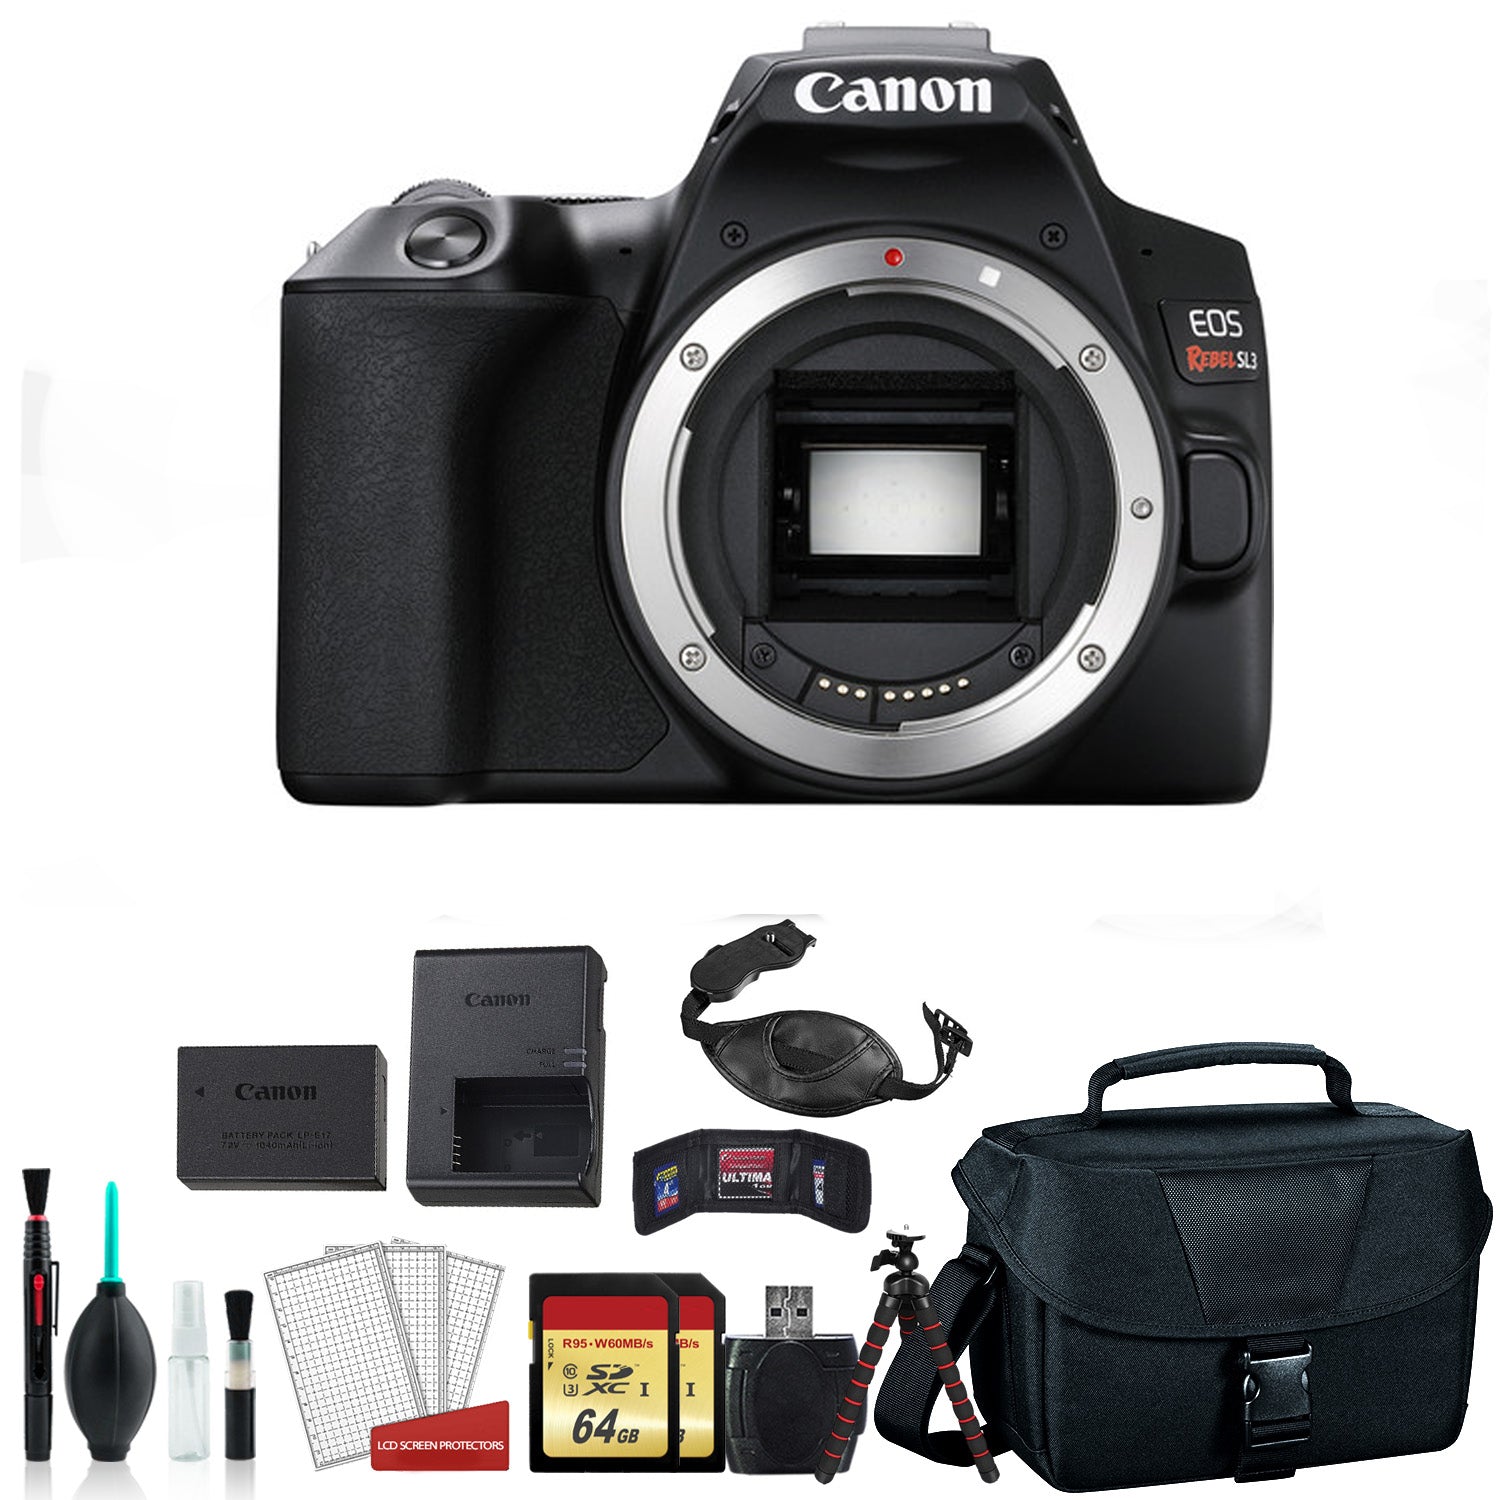 Canon Rebel SL3 Camera (Body Only) (Kit Box) - Kit with 2x 64GB Card